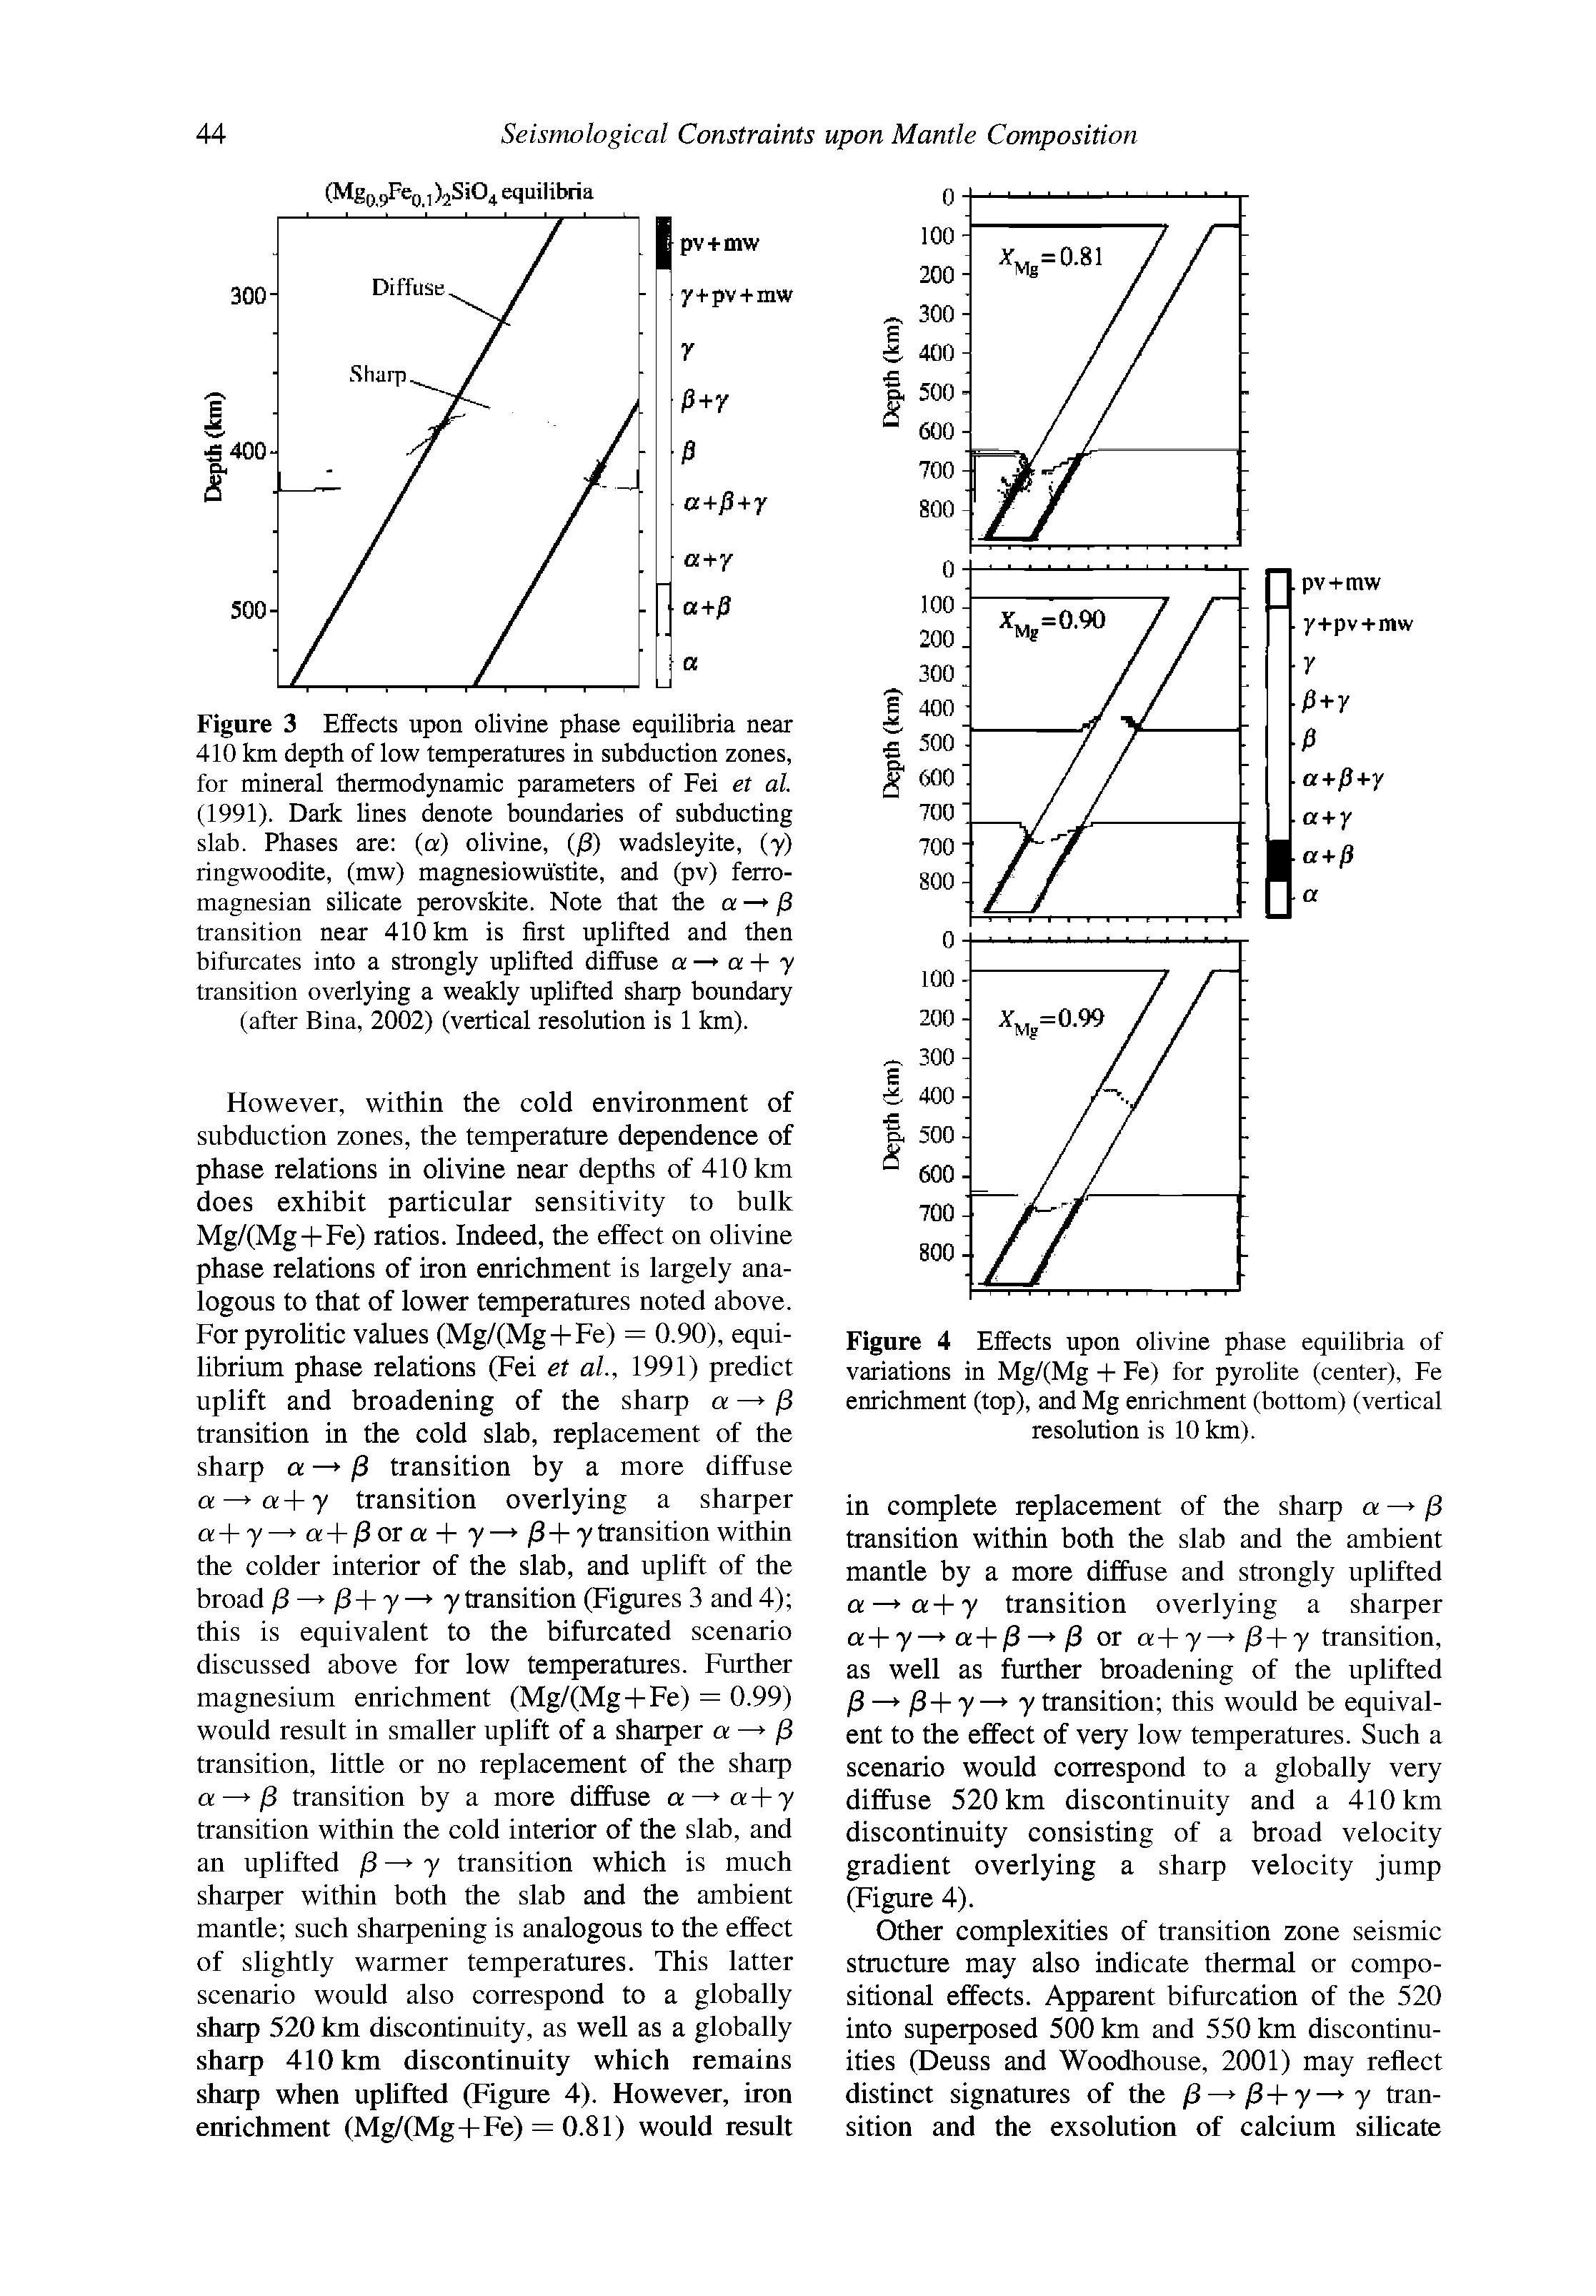 Figure 3 Effects upon olivine phase equilibria near 410 km depth of low temperatures in subduction zones, for mineral thermodynamic parameters of Fei et al. (1991). Dark lines denote boundaries of subducting slab. Phases are (a) olivine, (P) wadsleyite, (-y) ringwoodite, (mw) magnesiowustite, and (pv) ferro-magnesian silicate perovskite. Note that the a — 3 transition near 410 km is first uplifted and then bifurcates into a strongly uplifted diffuse a — a + -y transition overlying a weakly uplifted sharp boundary (after Bina, 2002) (vertical resolution is 1 km).